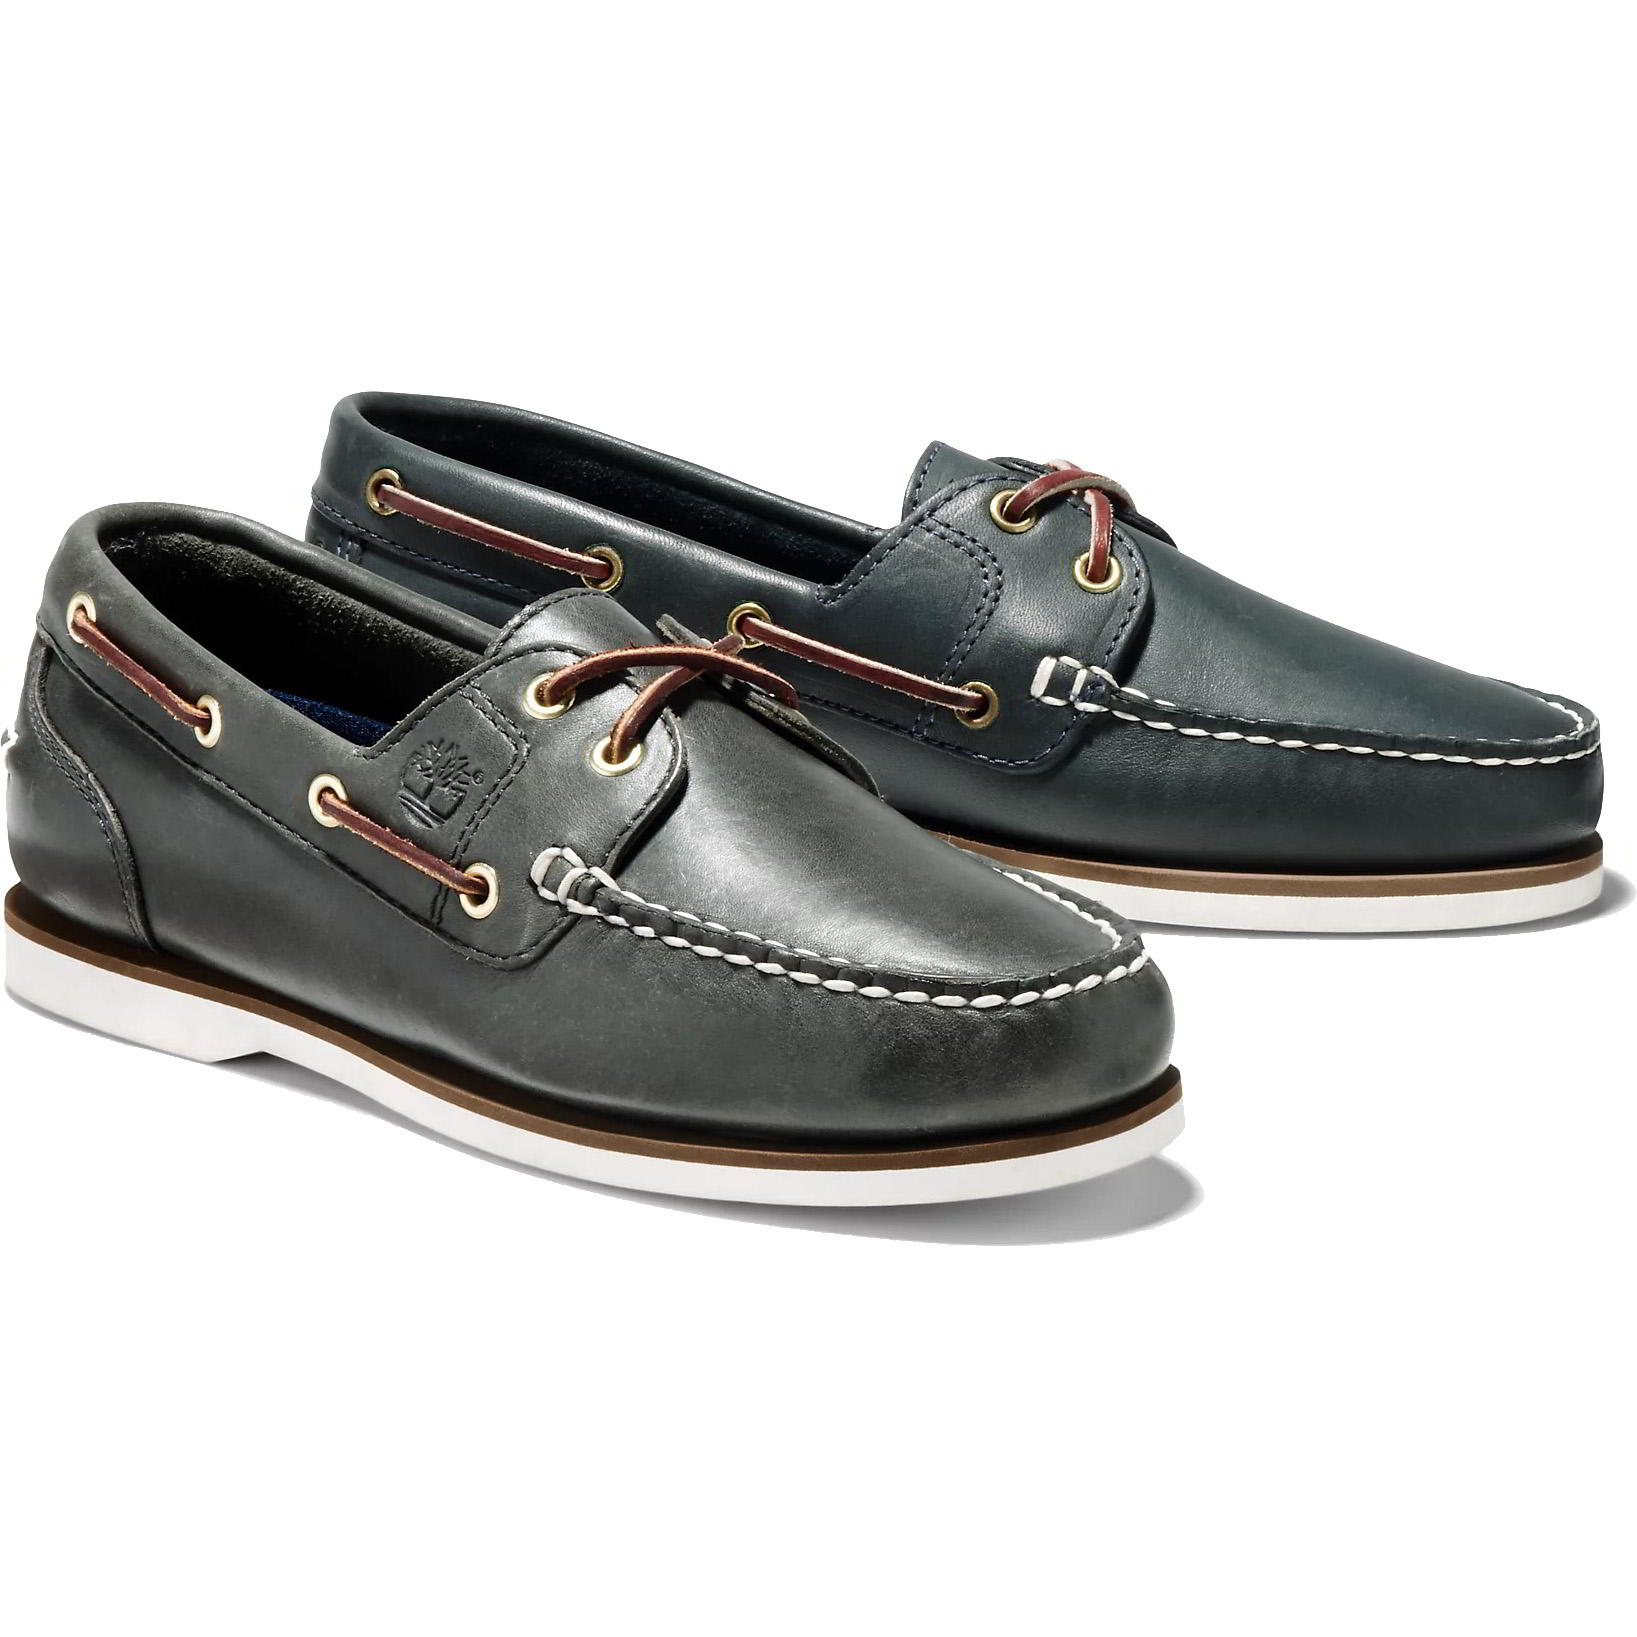 Timberland Women's Amherst Boat Shoes - Navy - 72332